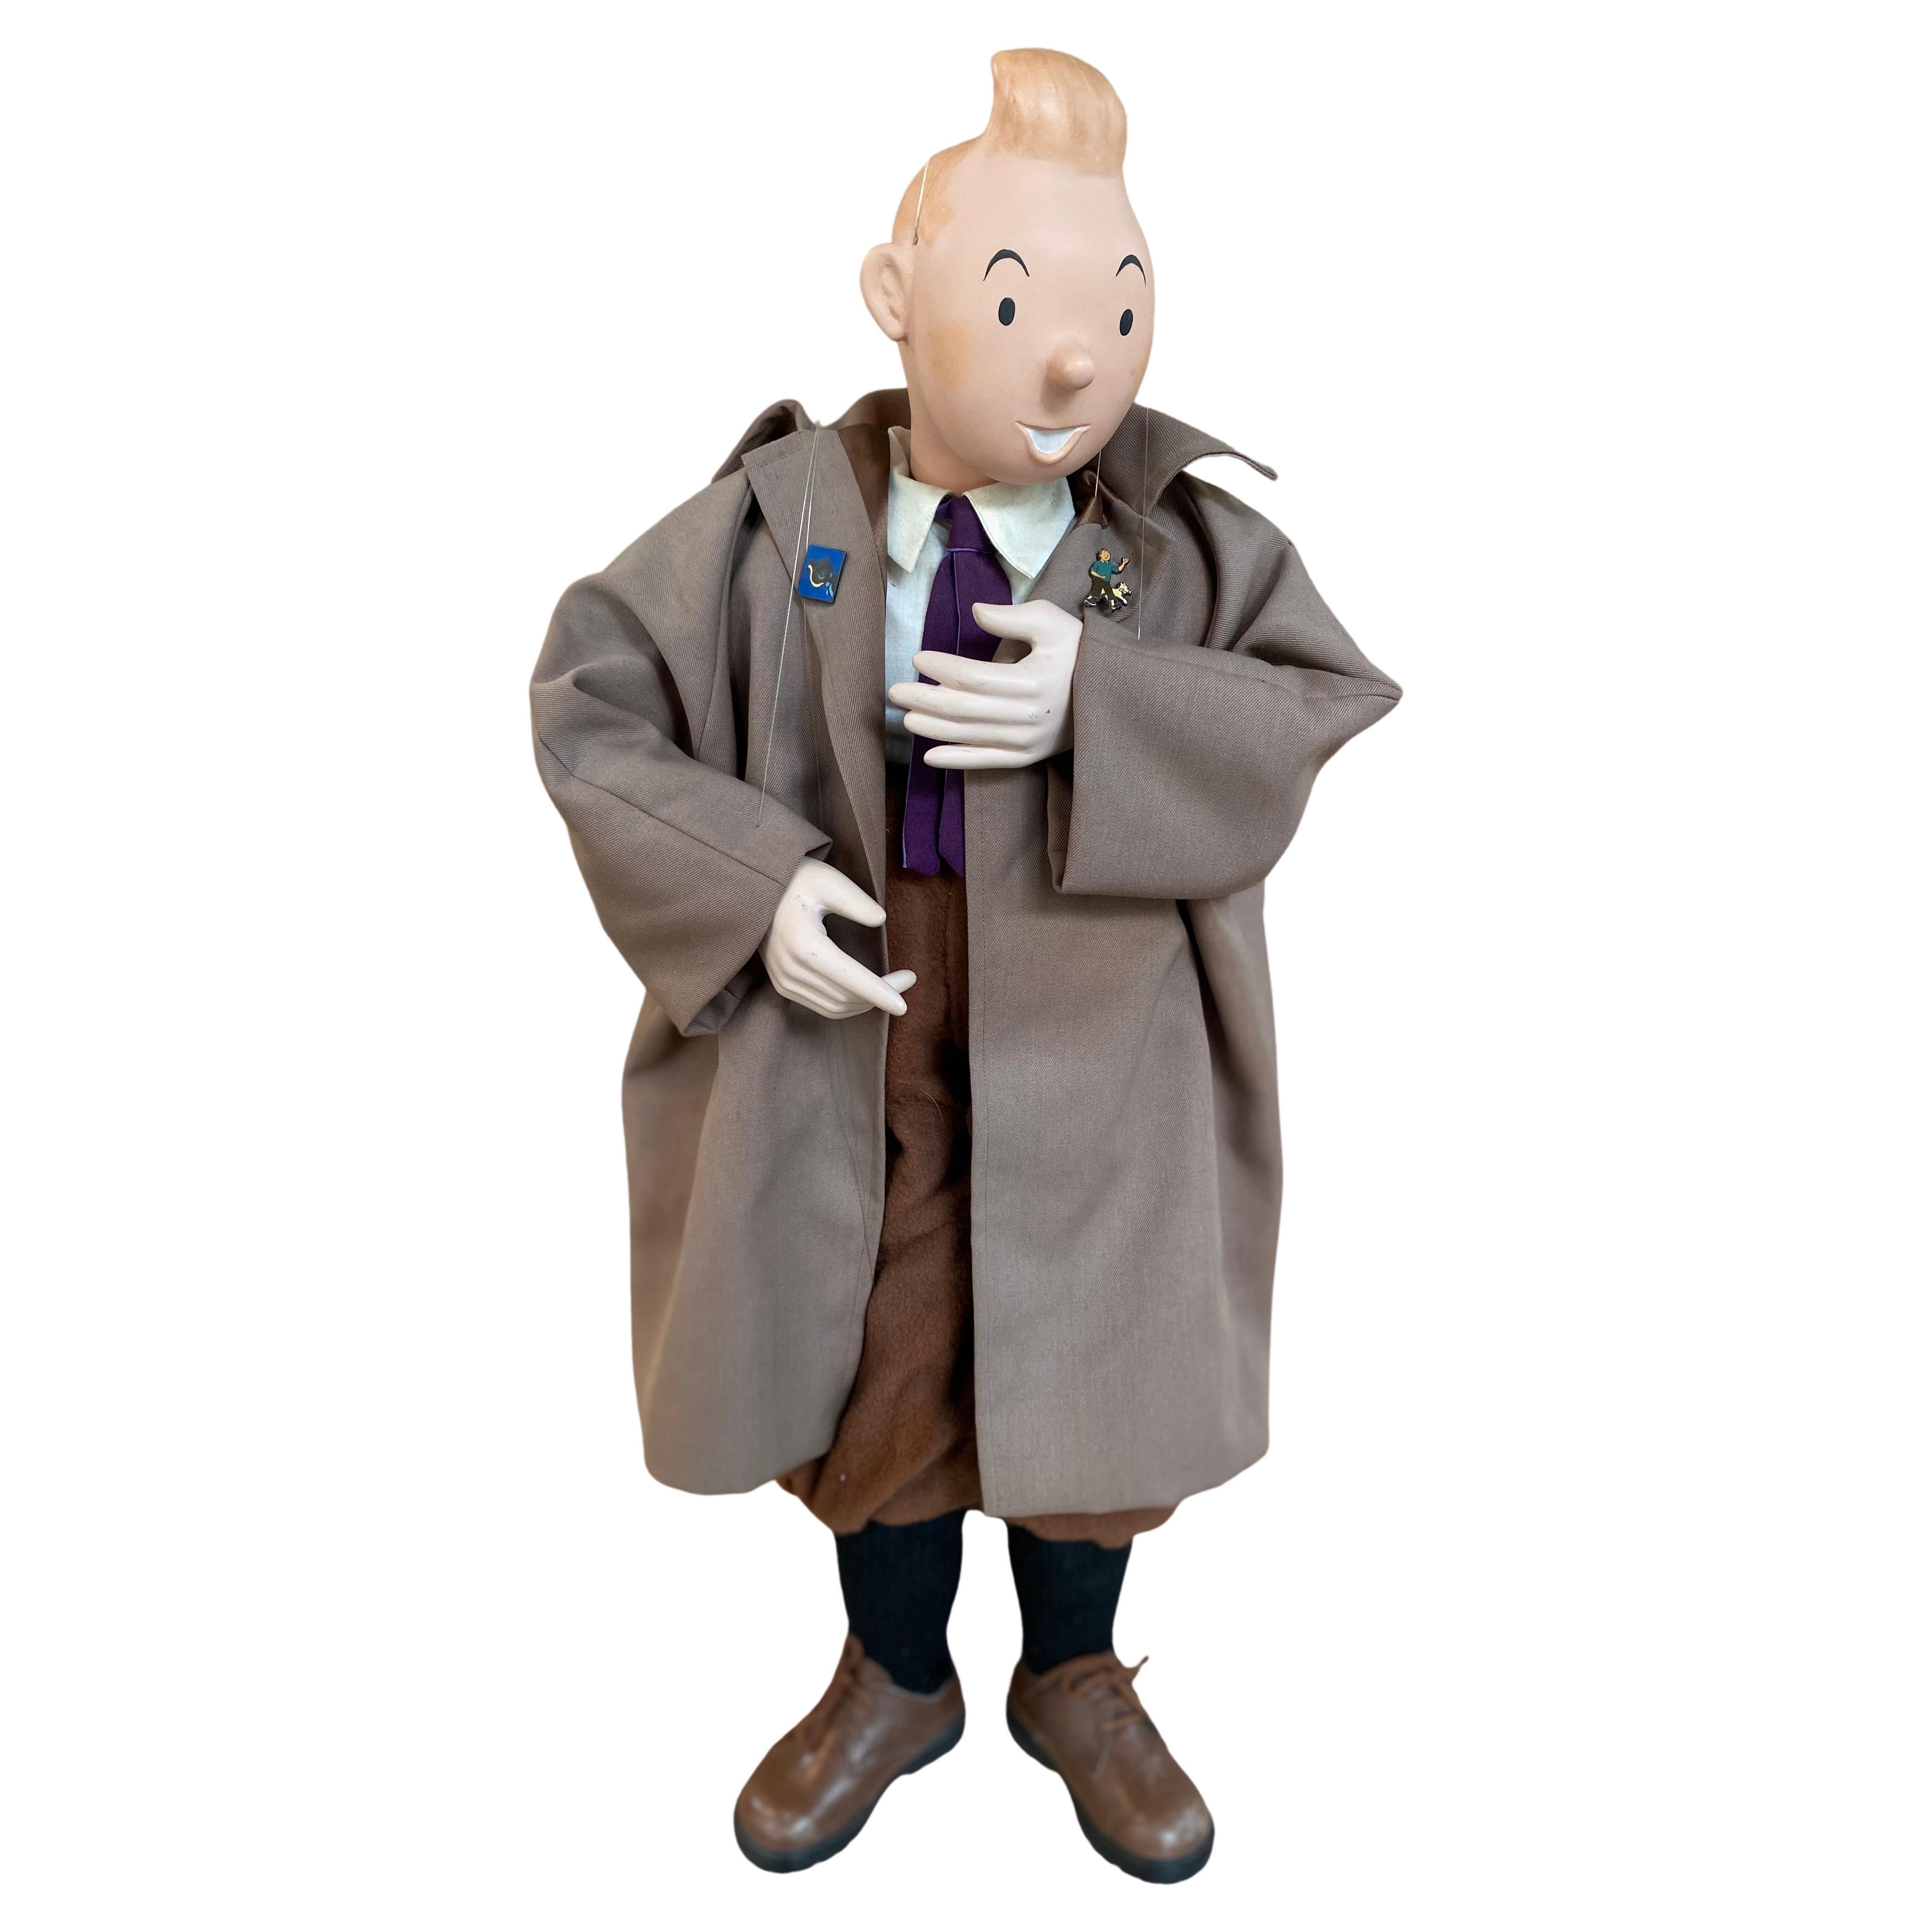 Very Rare Tintin Puppet Hergé, Georges Remi Dit For Sale